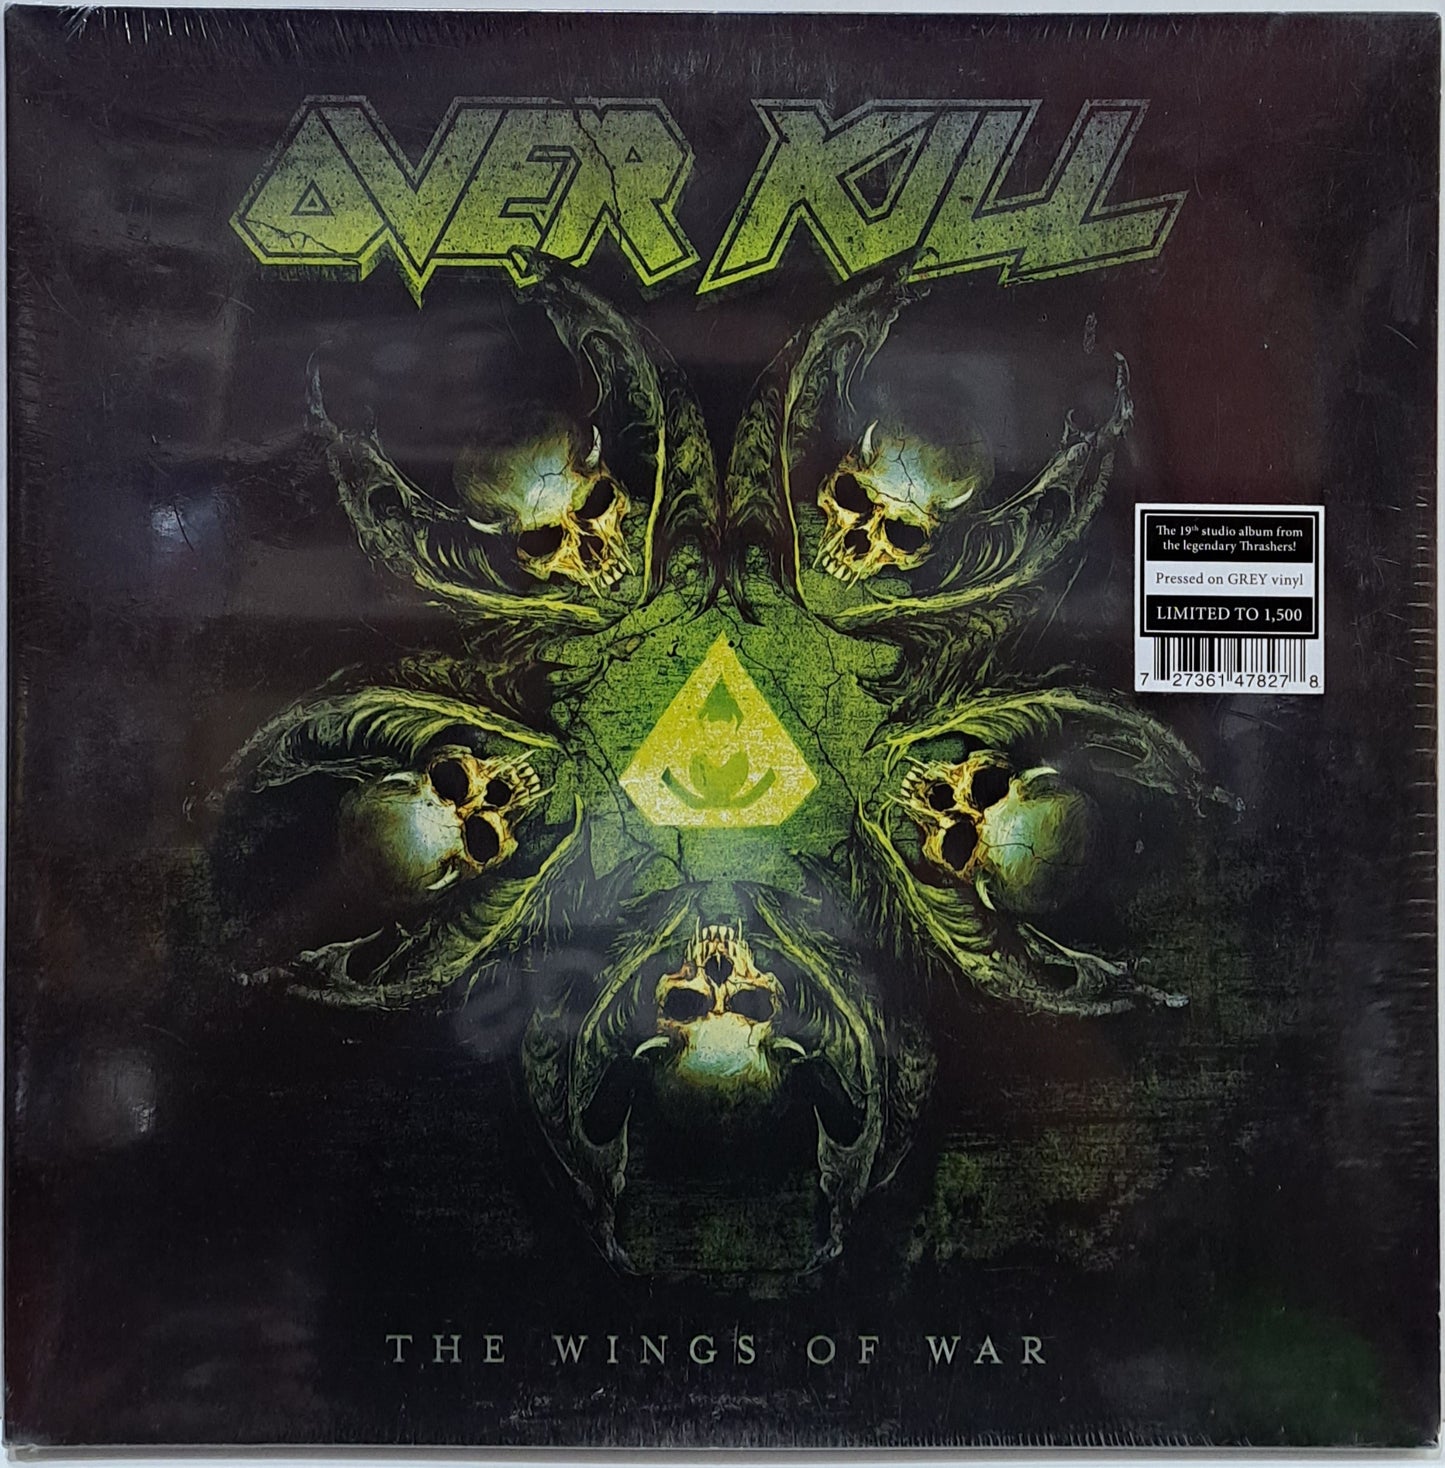 OVER KILL - THE WINGS OF WAR  2 LPS